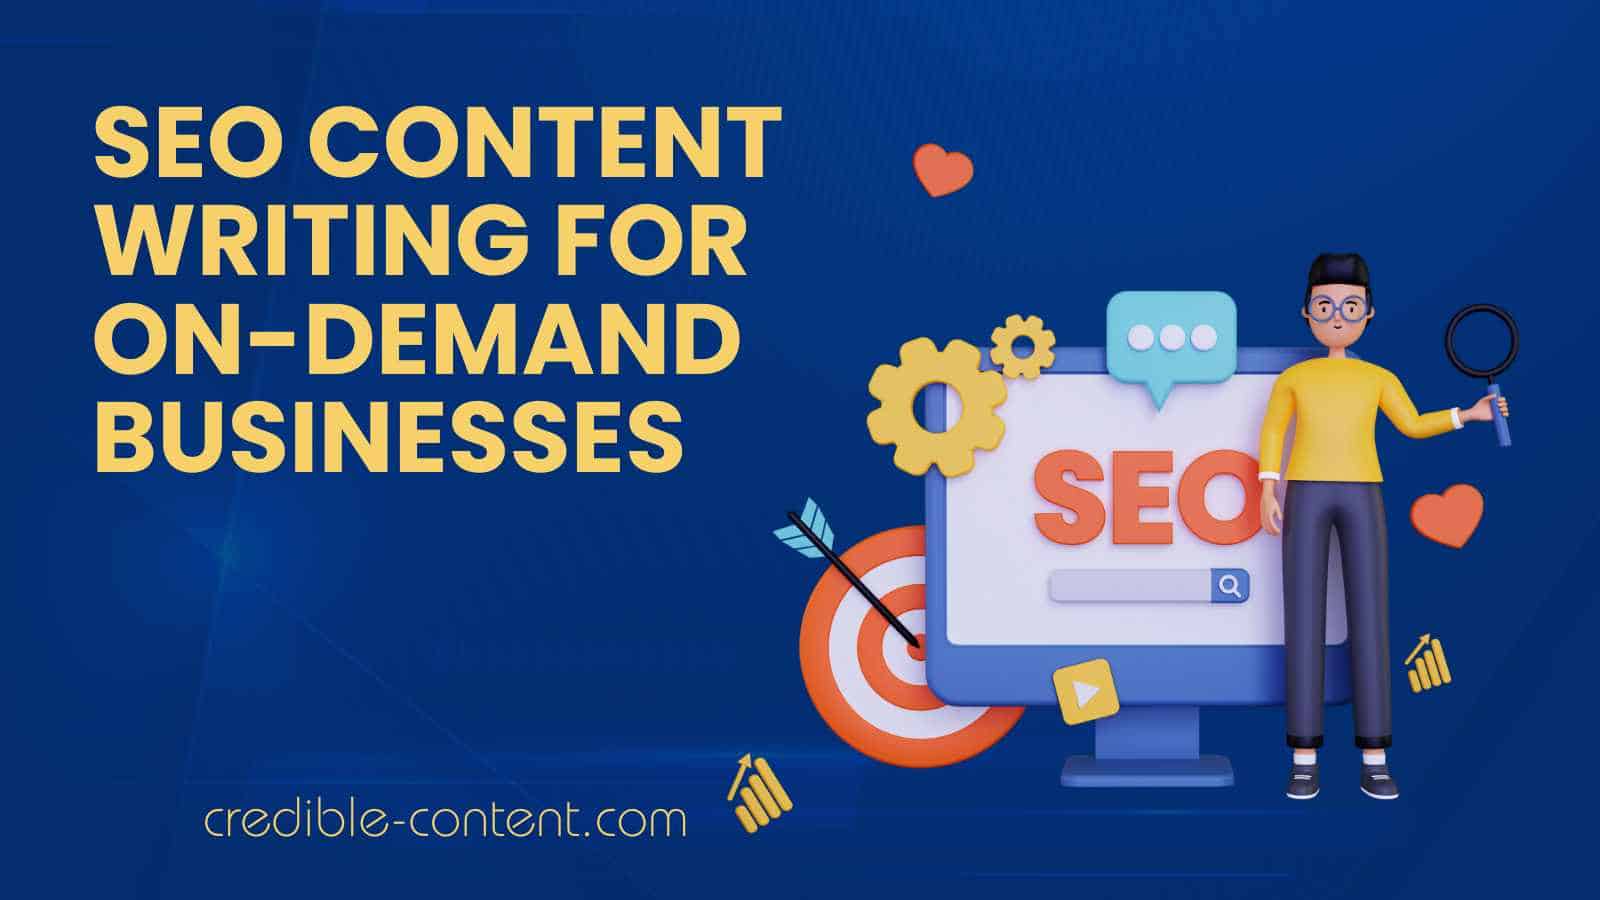 SEO content writing for on-demand businesses